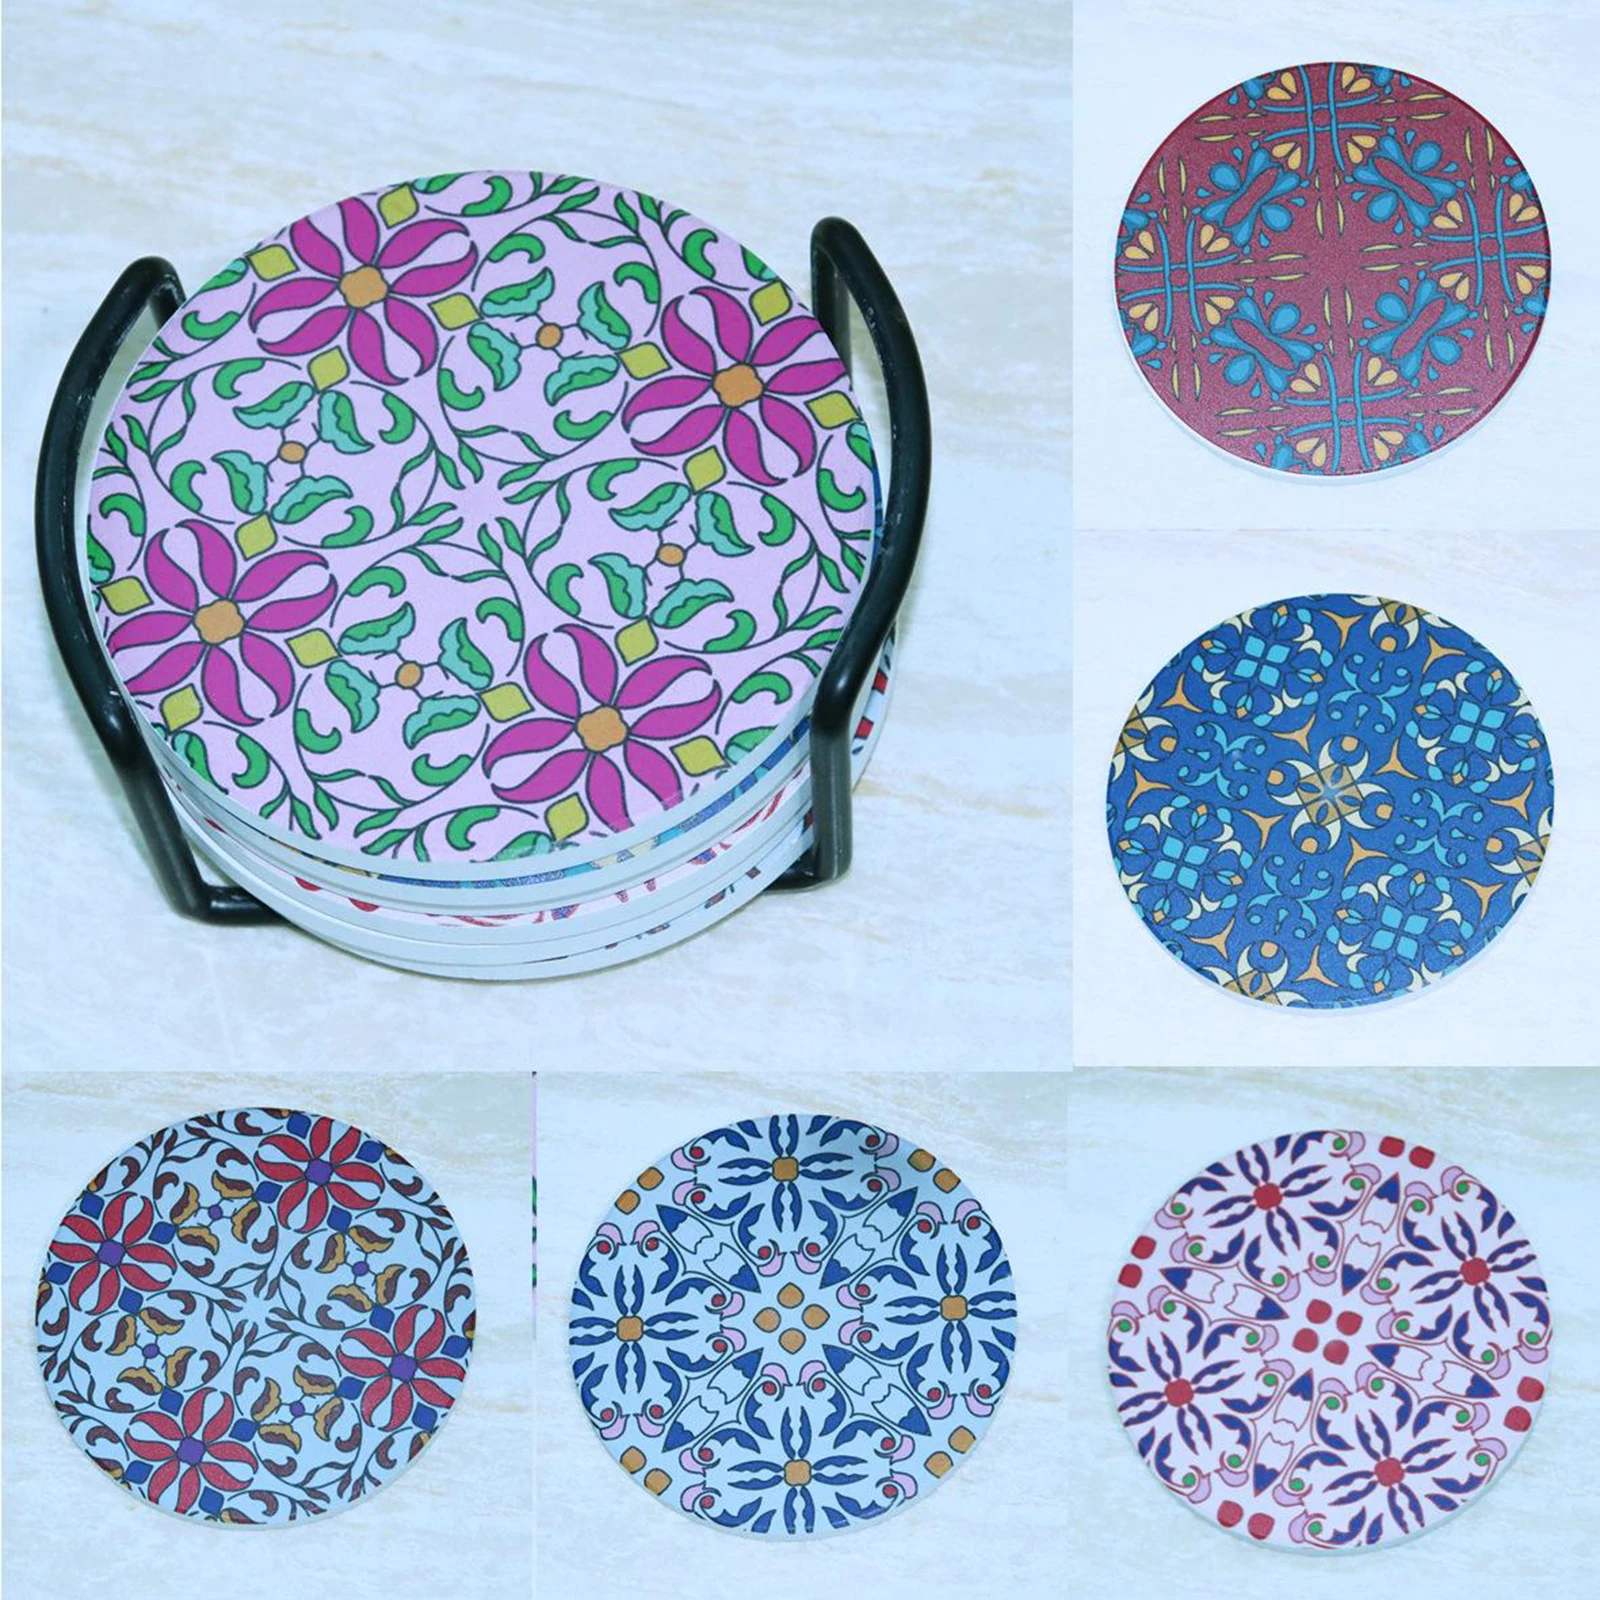 Ceramic Stone Mandala Floral Coasters for Wooden Table Cork Base Cup Pads for Gifts Dining Room Room Bar Decor